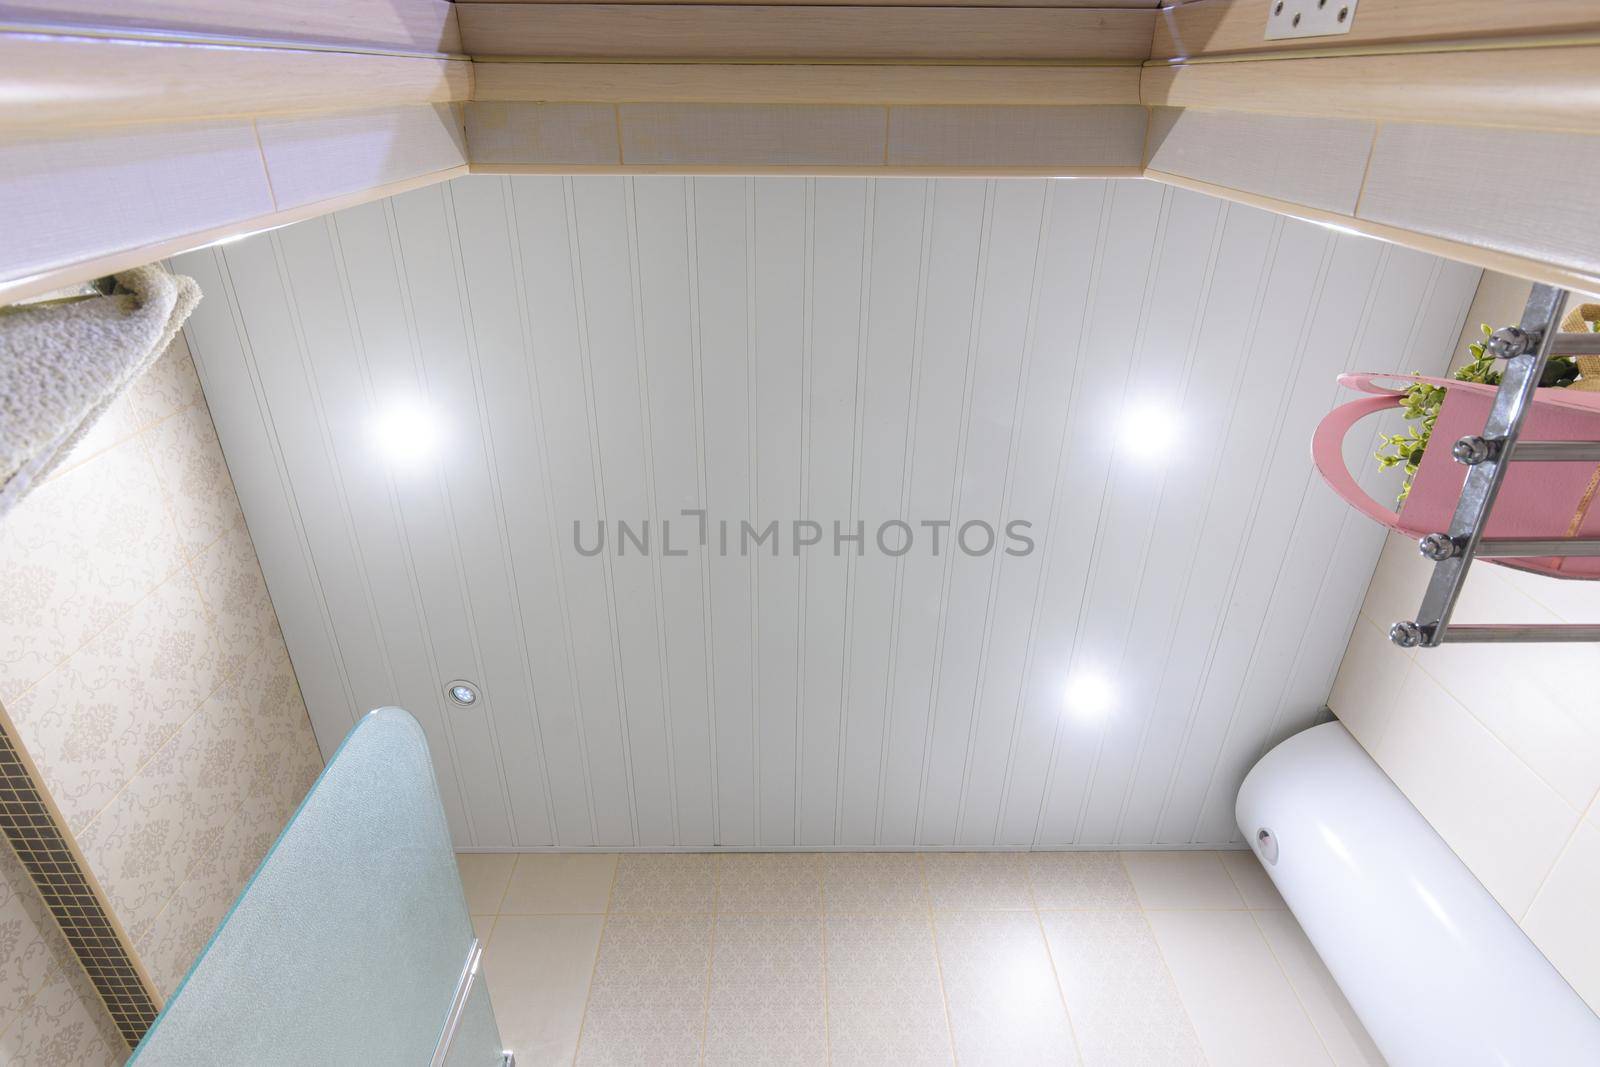 Bathroom ceiling made of white metal panels, with built-in lights, one of which has burned out